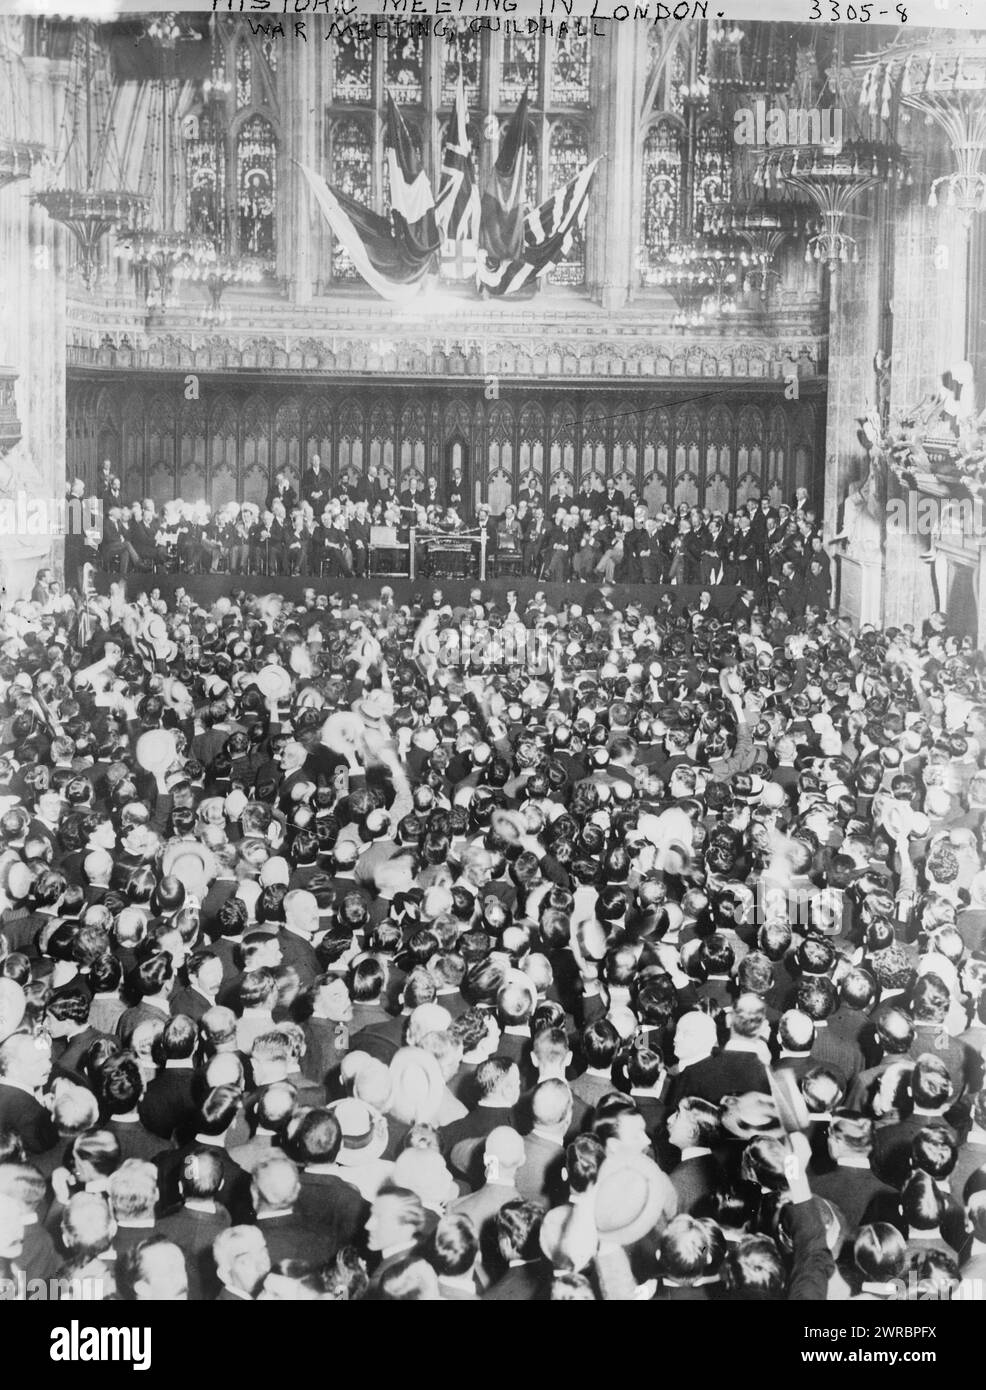 Historic Meeting in London, Photograph shows a meeting at the Guildhall in London on September 4, 1914, during which Prime Minister Herbert Henry Asquith encouraged military recruitment for World War I., 1914 September 4, World War, 1914-1918, Glass negatives, 1 negative: glass Stock Photo